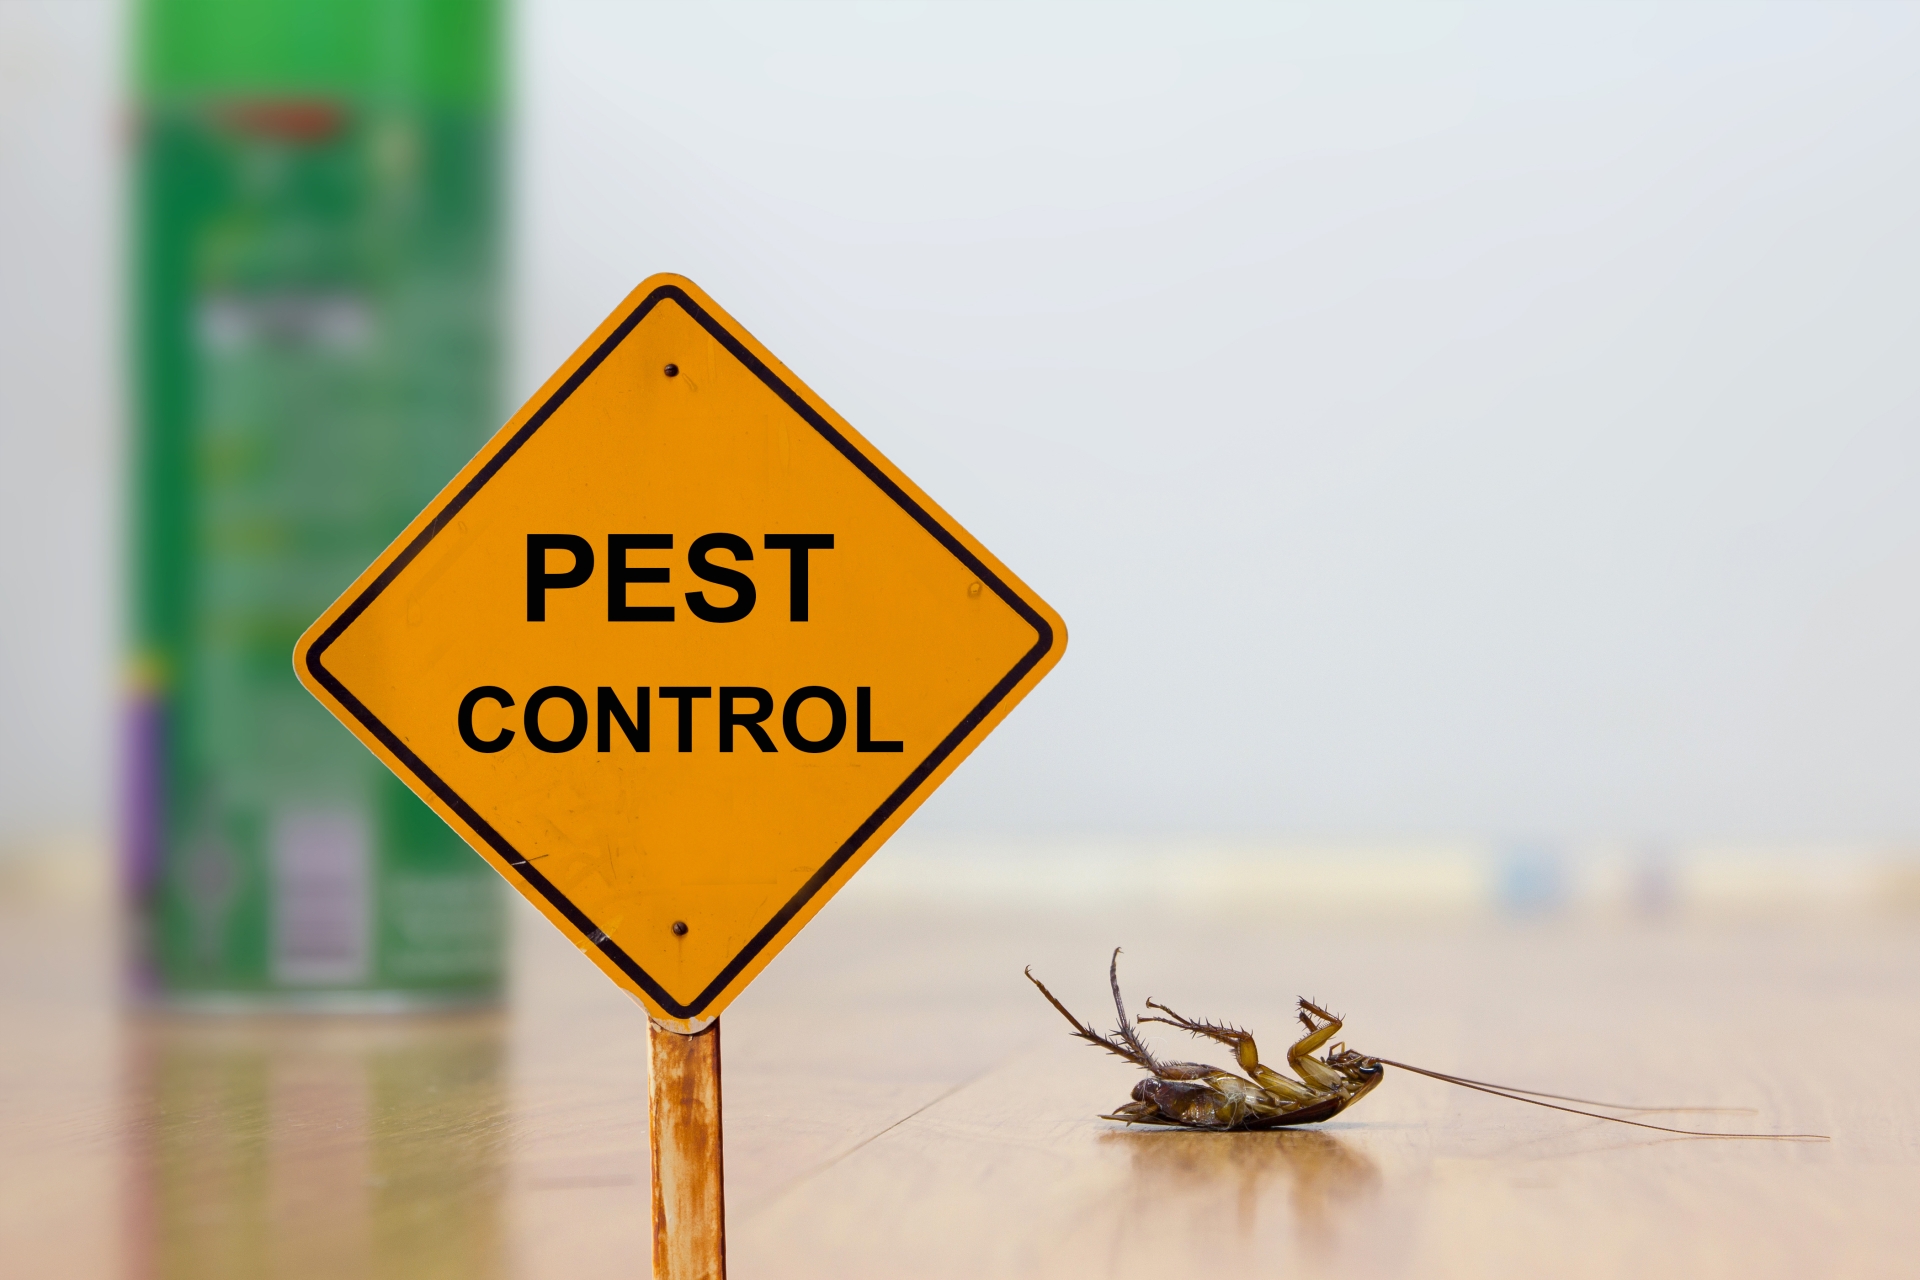 24 Hour Pest Control, Pest Control in Chiswick, W4. Call Now 020 8166 9746